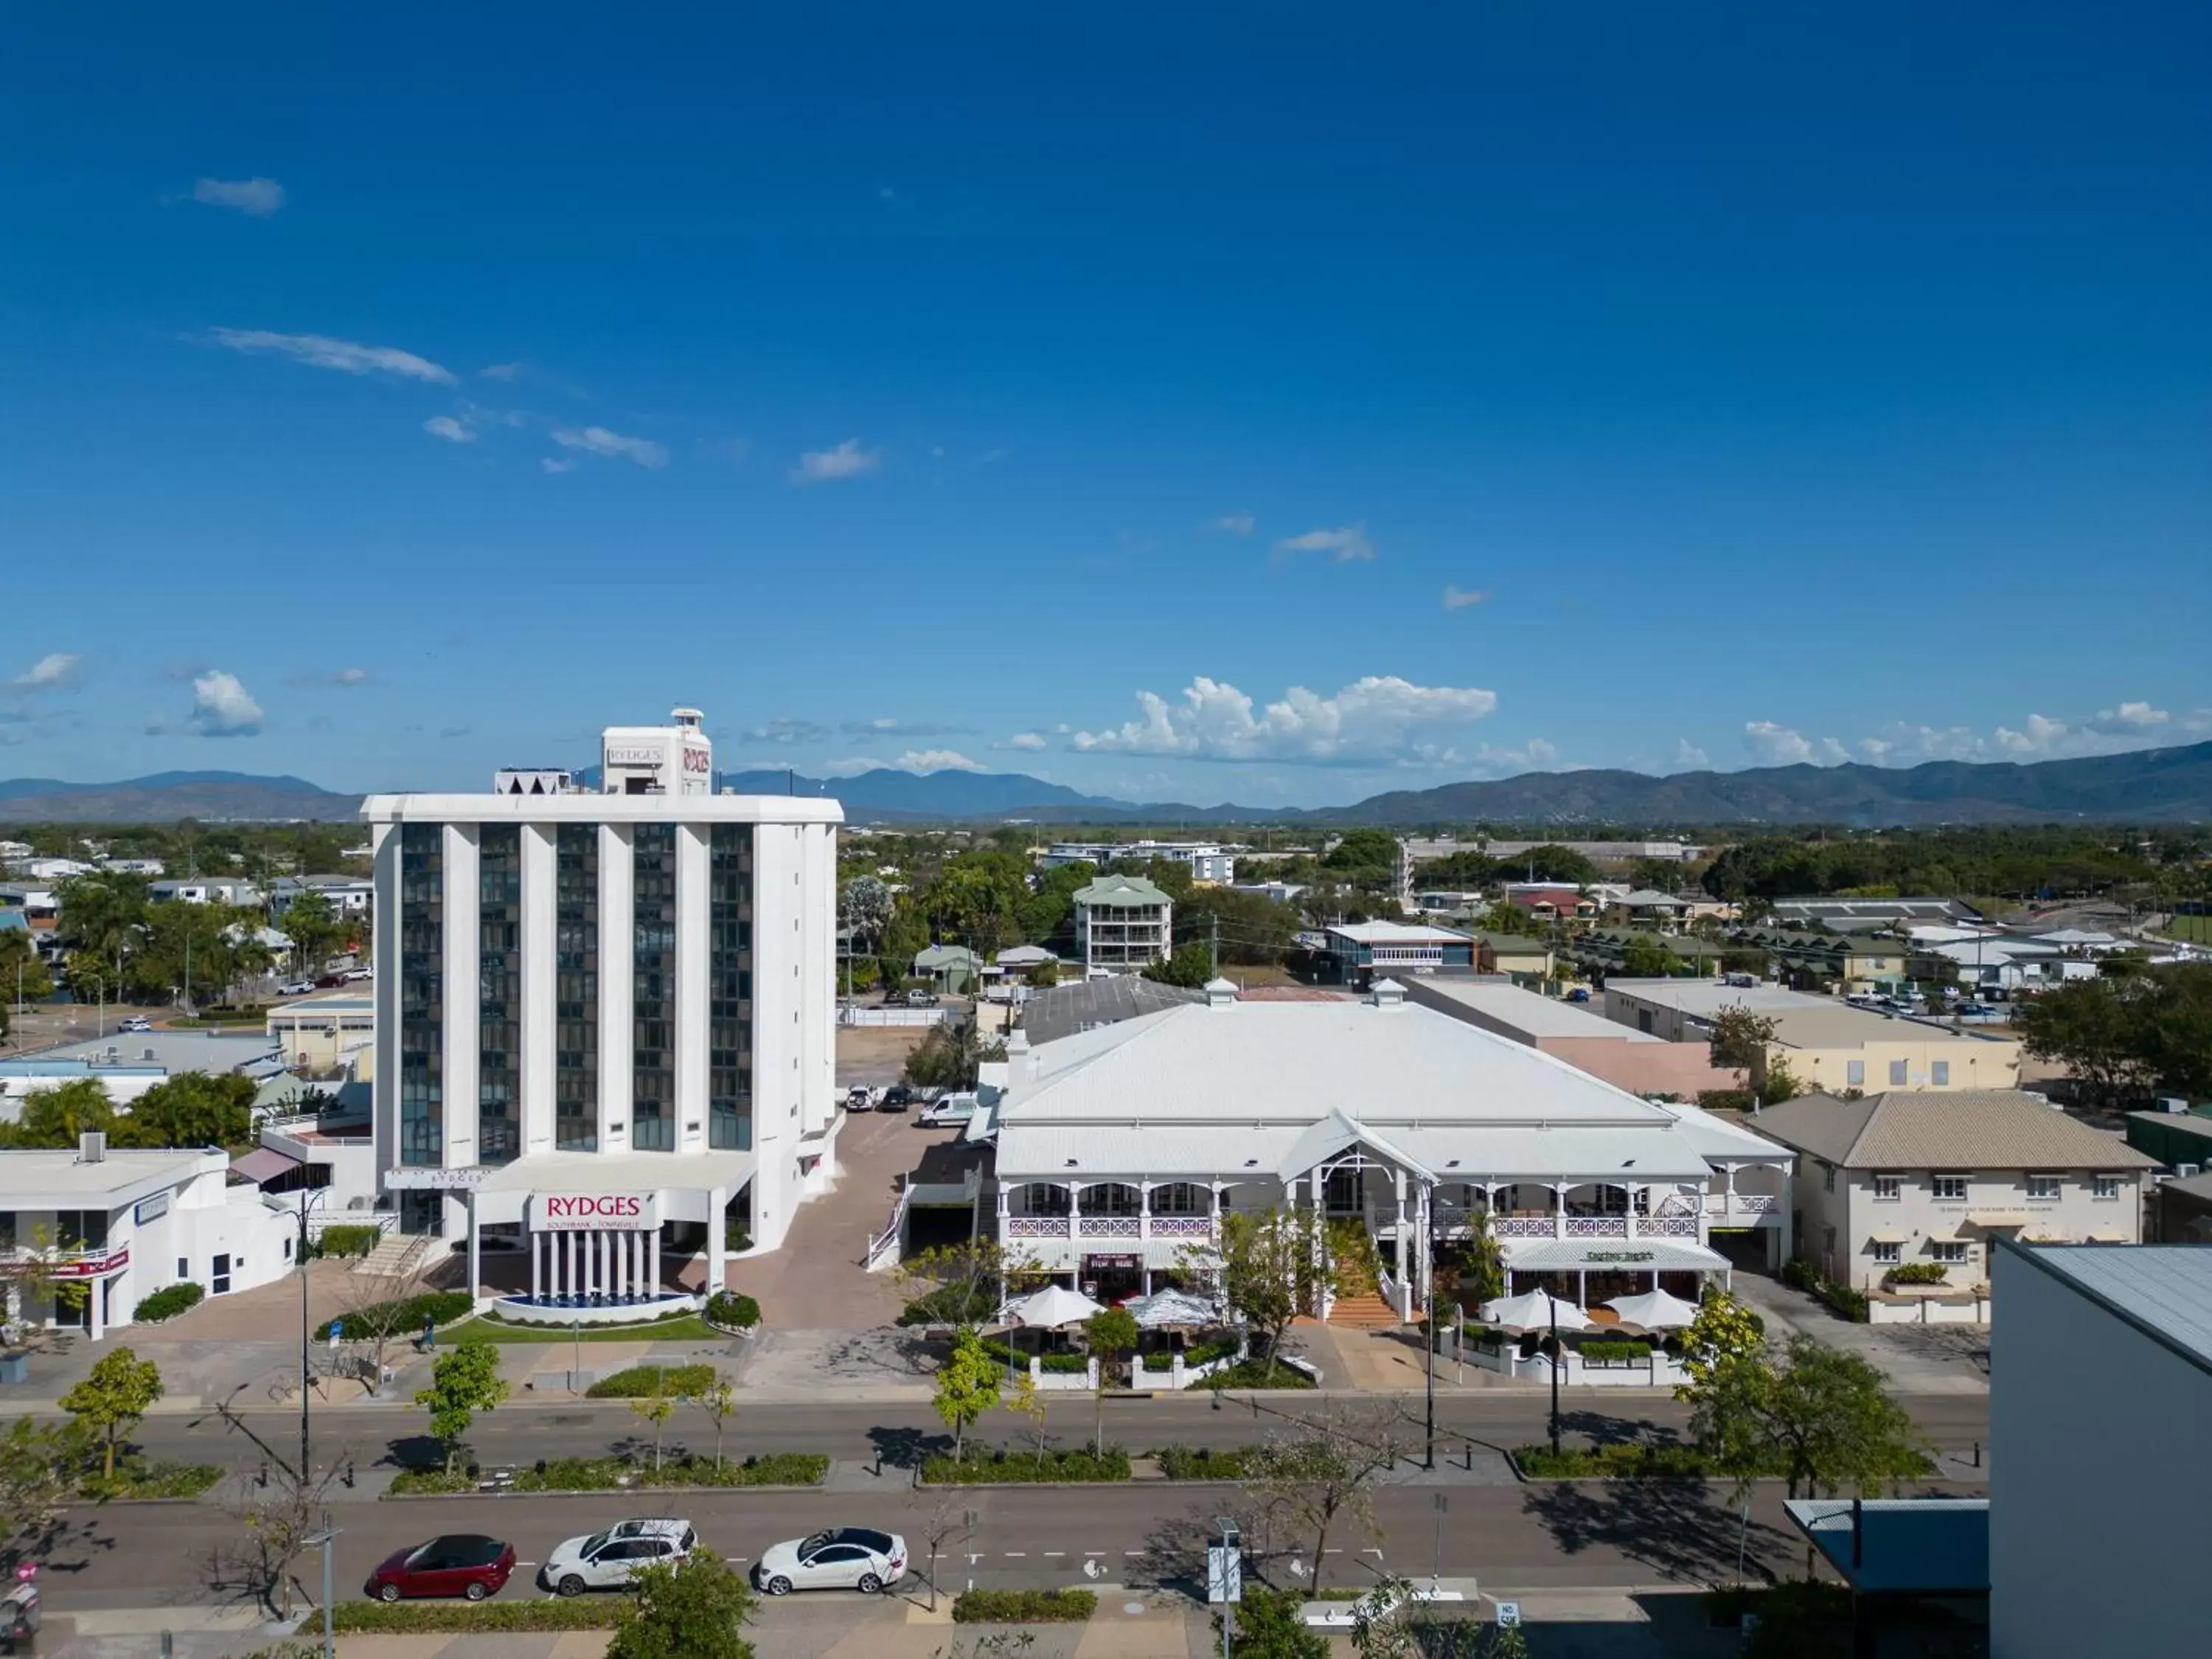 Property building in Rydges Southbank Townsville